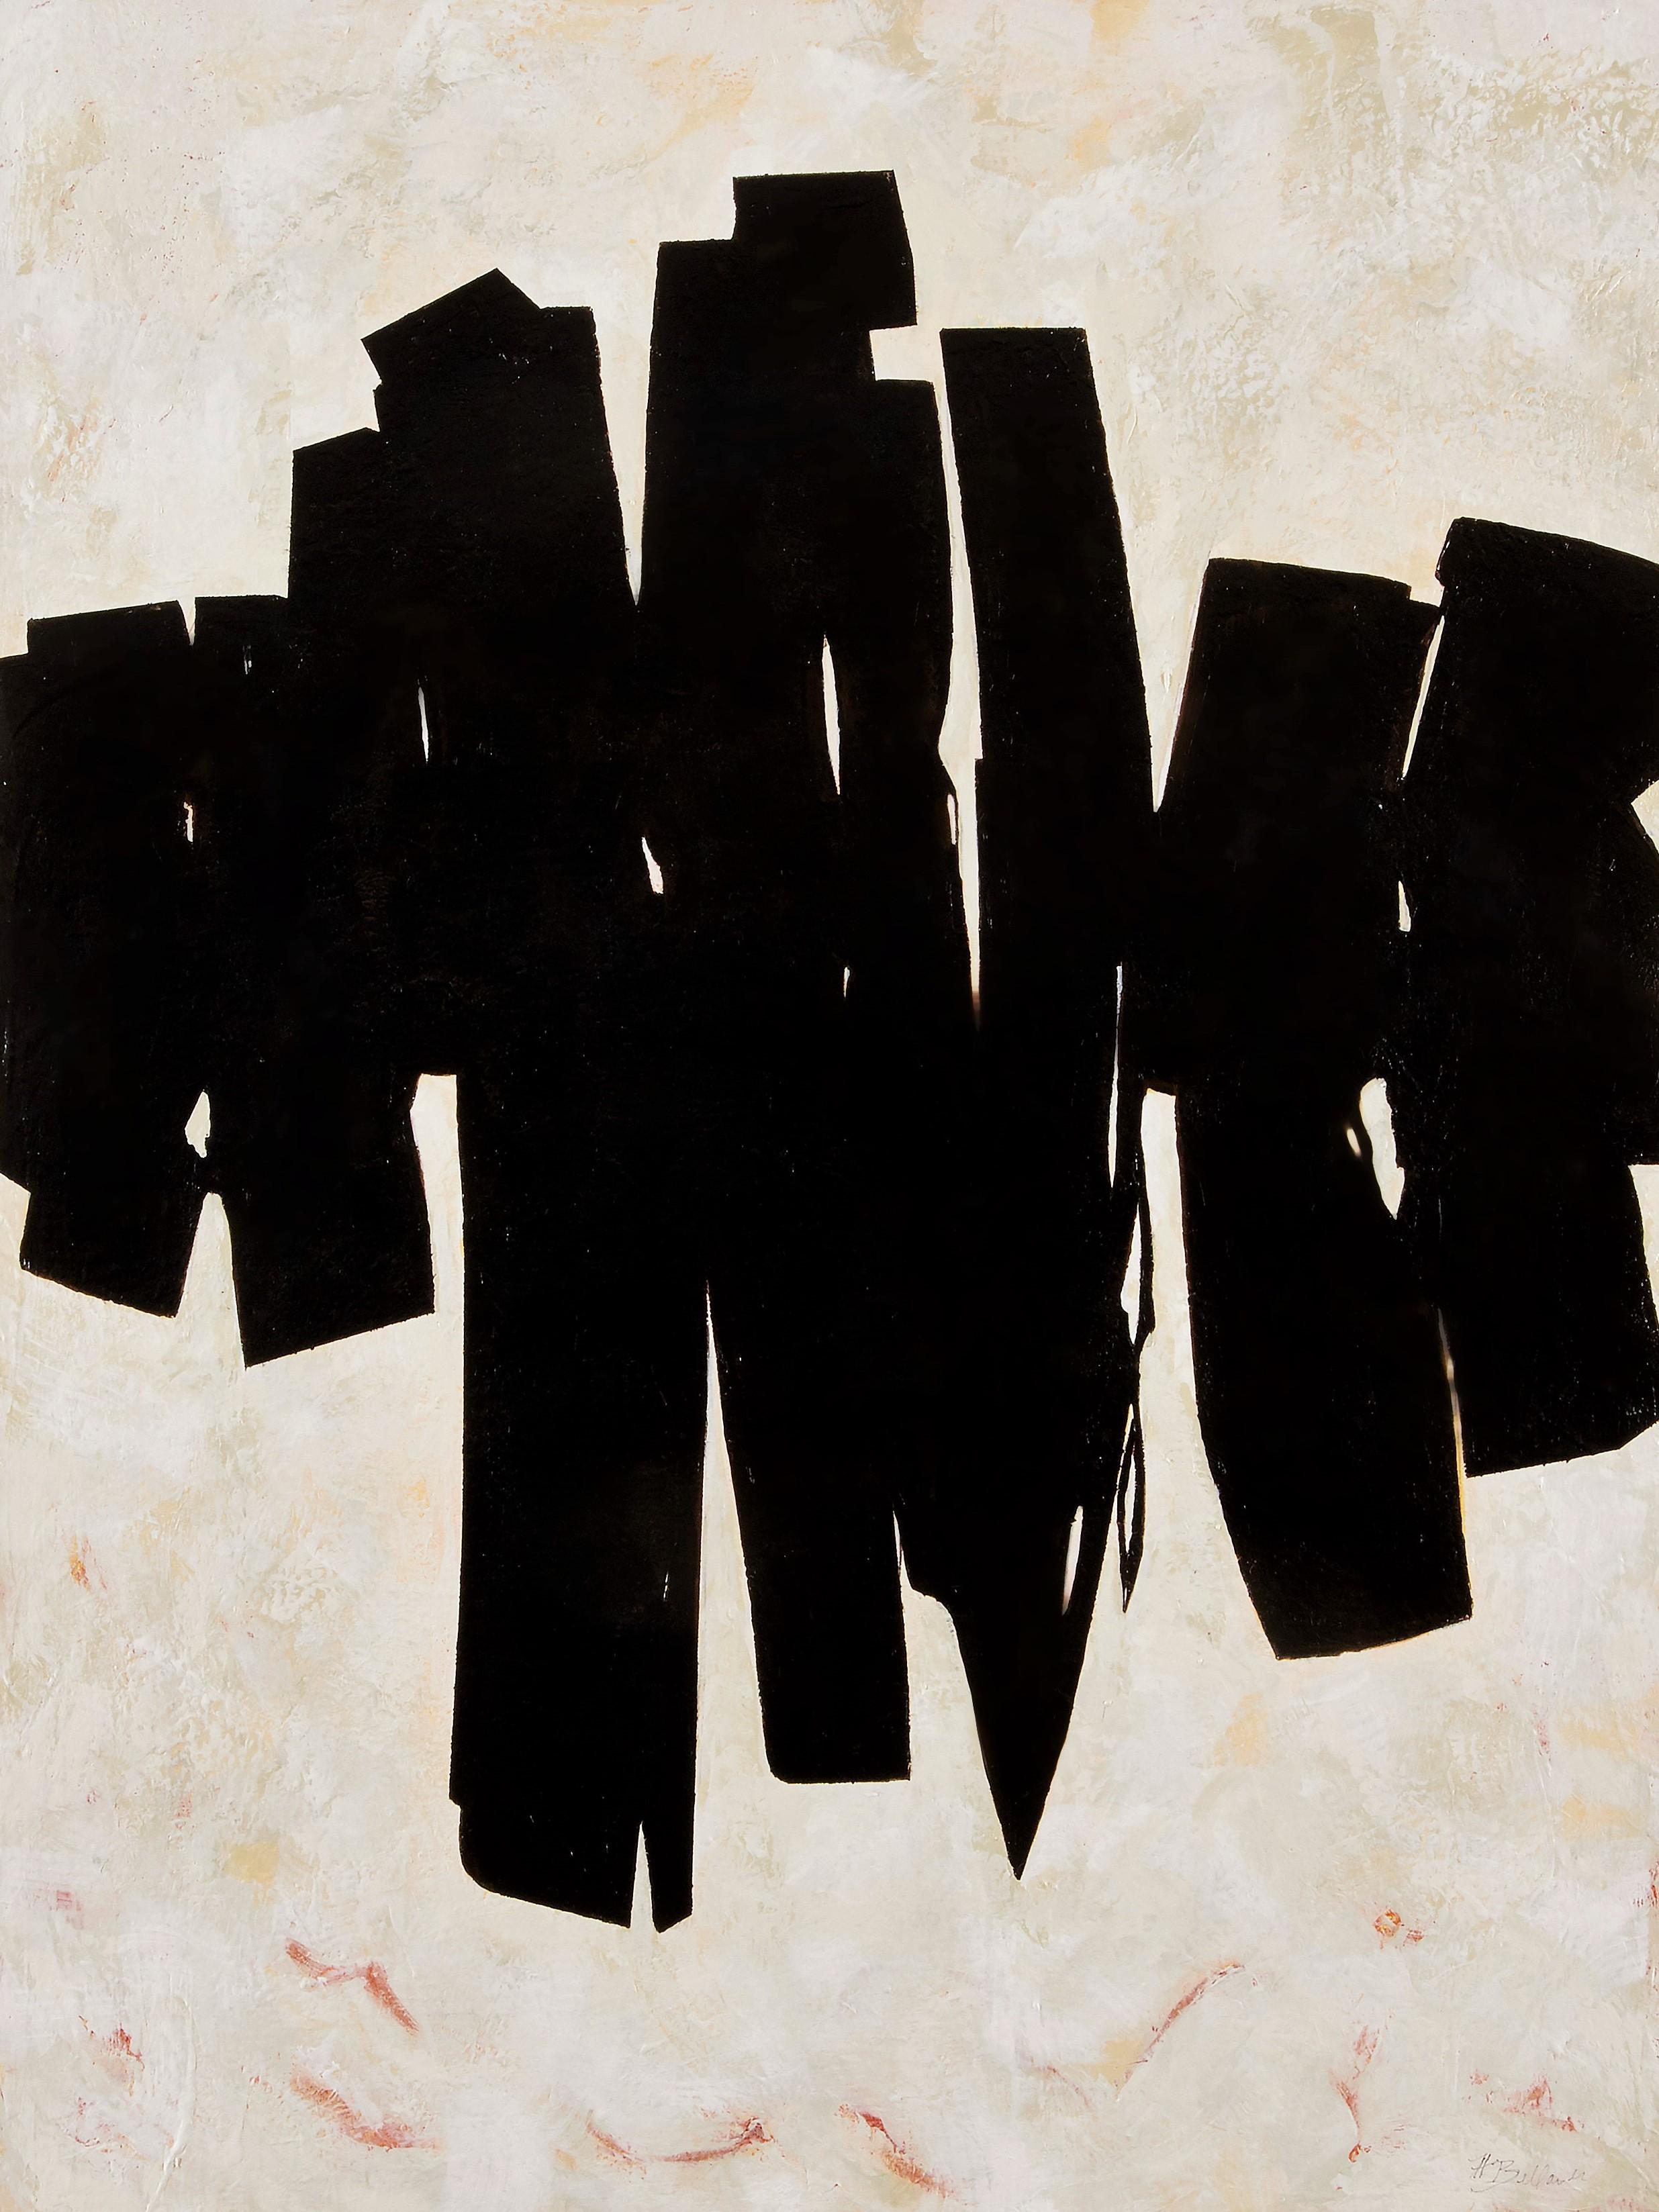 Stance- Bold Abstract Expressionist Painting in Black & Cream w/ Subtle Texture - Mixed Media Art by Helen Bellaver